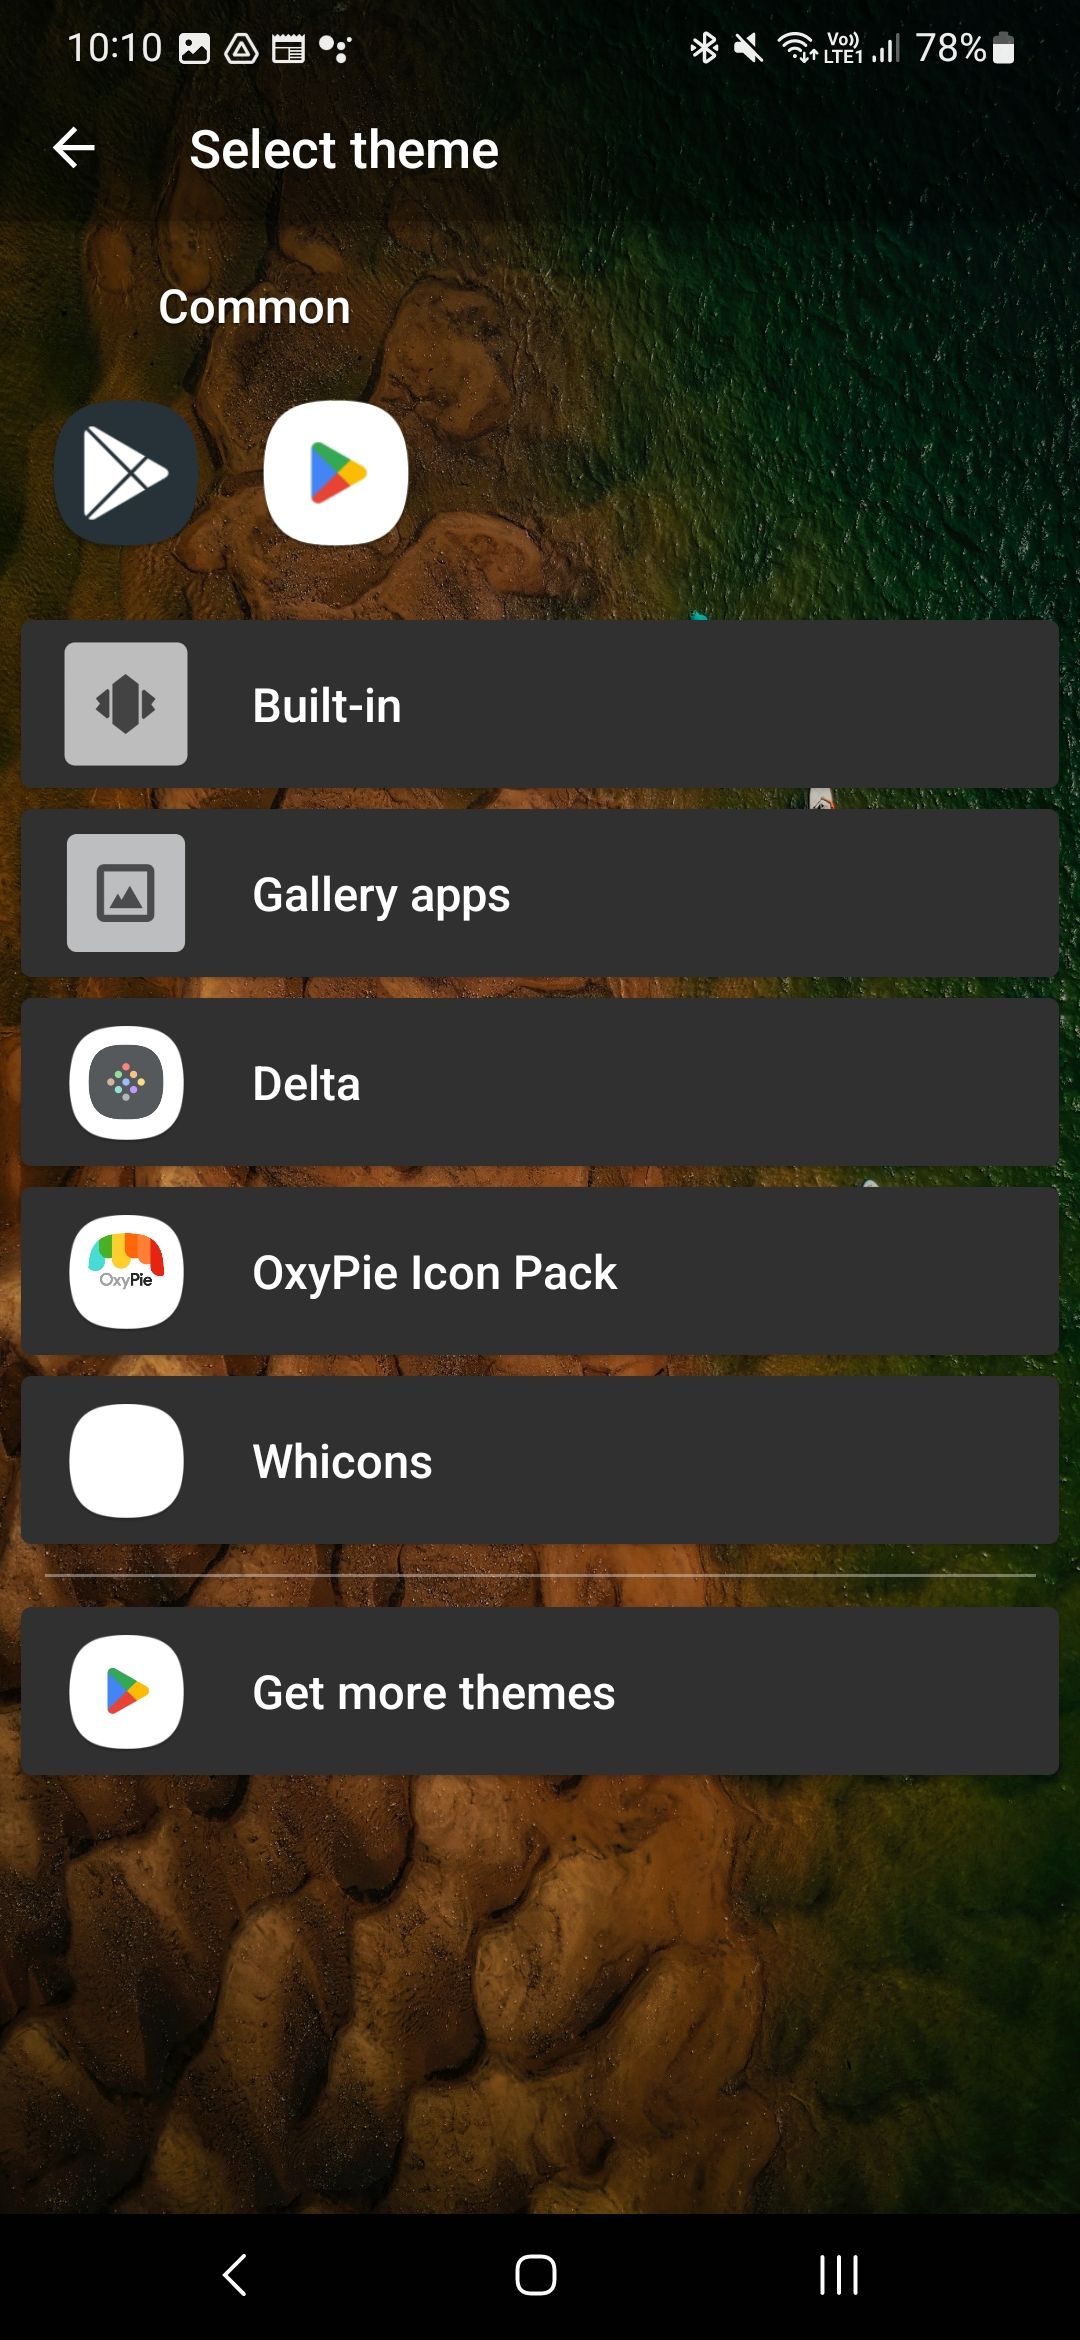 Changing an app icon in Nova launcher